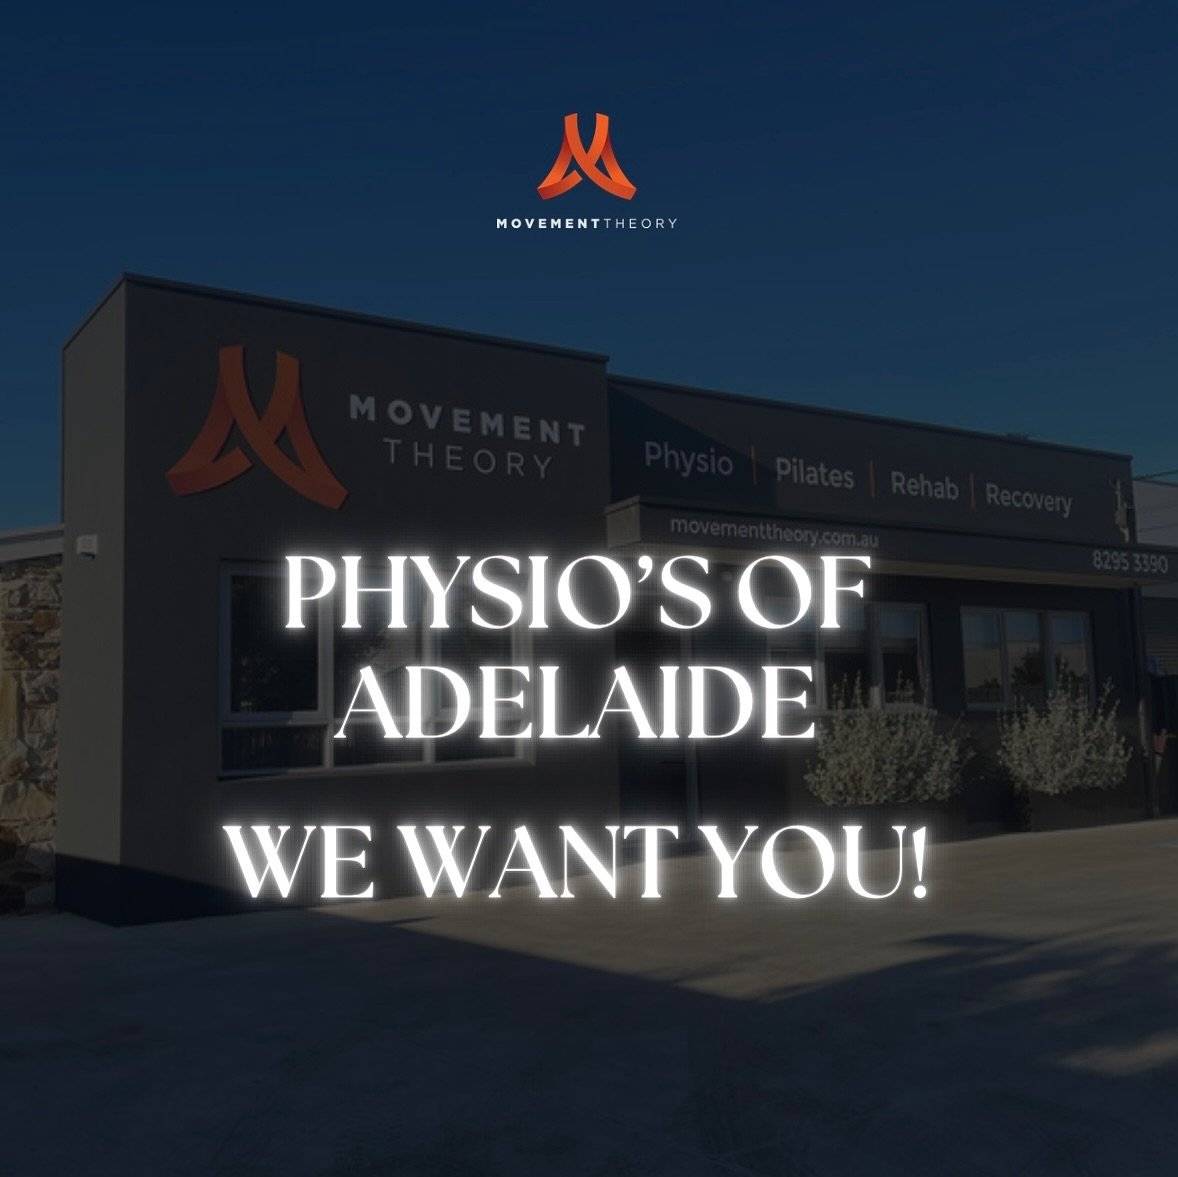 🌟 Movement Theory is on the hunt for a highly motivated physiotherapist with a passion for health &amp; wellbeing to join our amazing team! 🌟

At Movement Theory, we strive to create a culture where our staff thrive, feel comfortable, and most impo